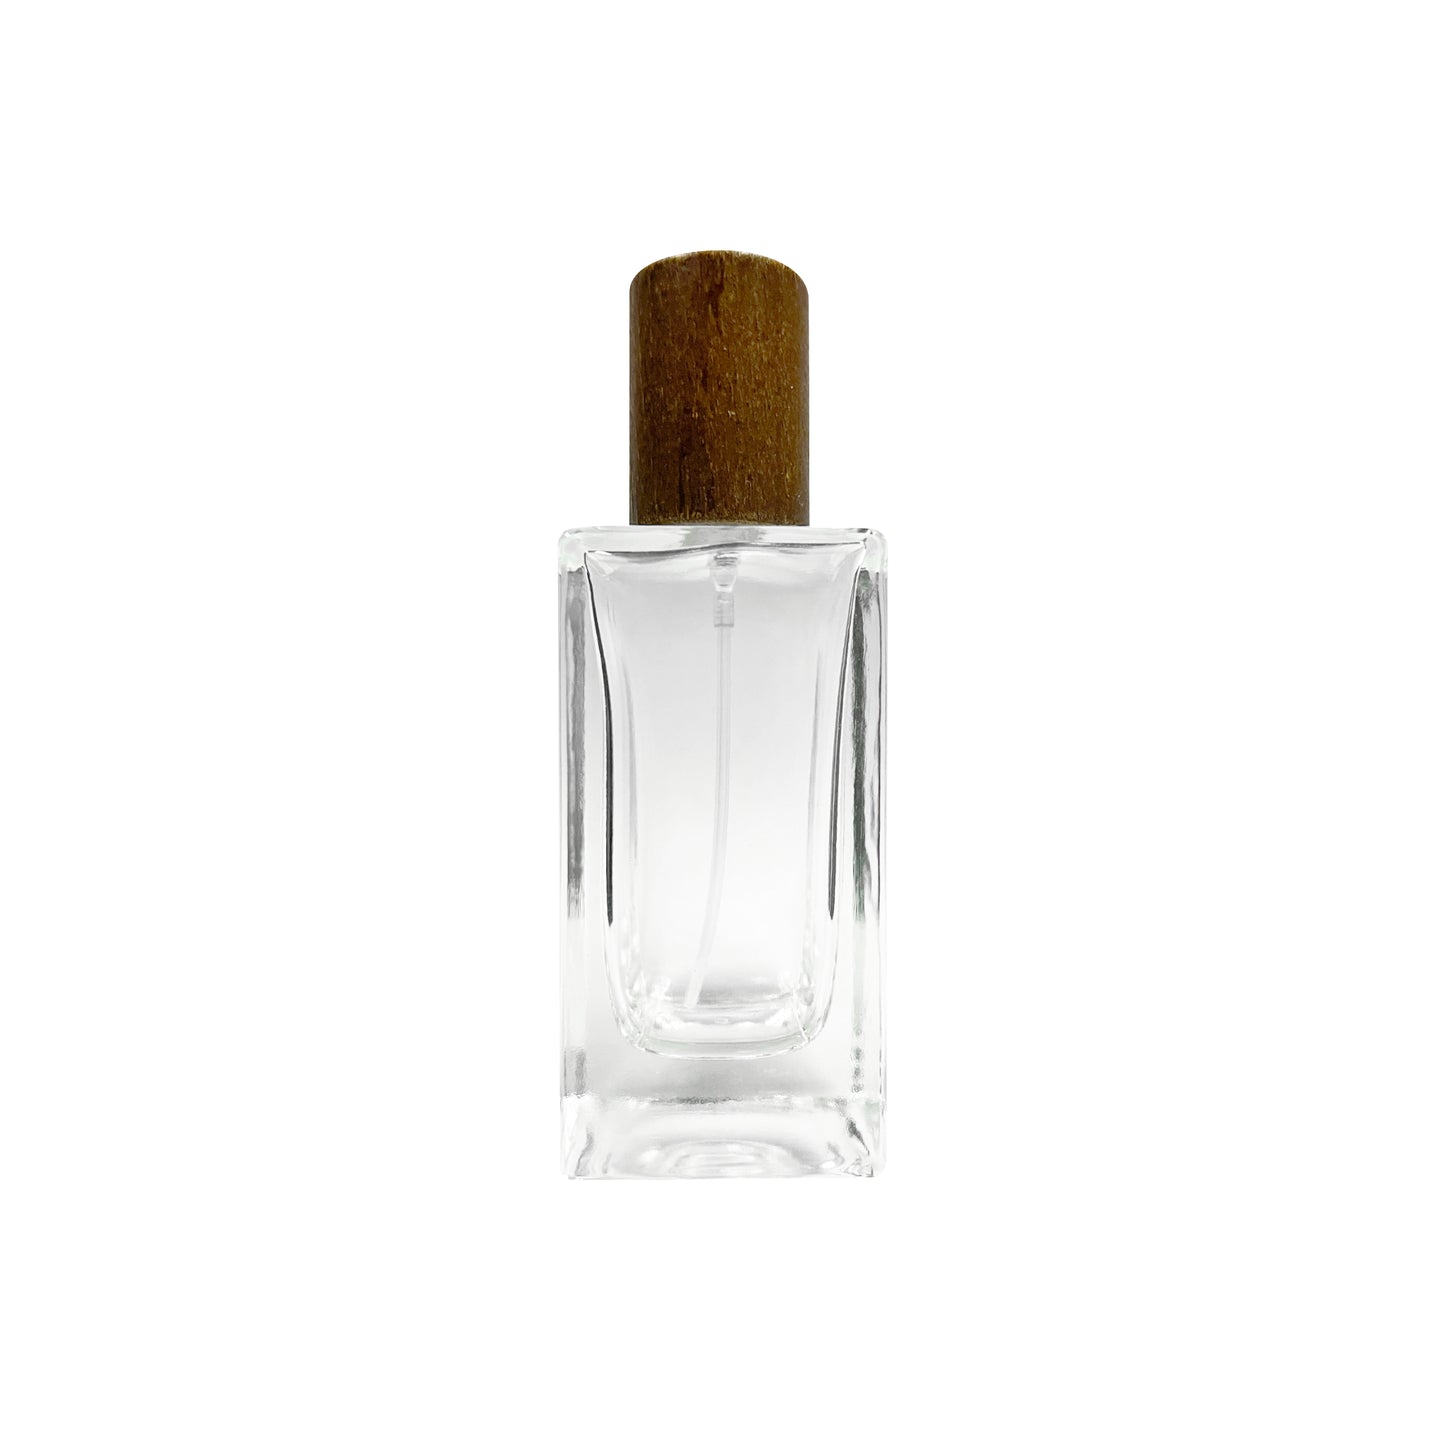 50 ml Clear Glass Rectangular Perfume Bottle with Wooden Cap